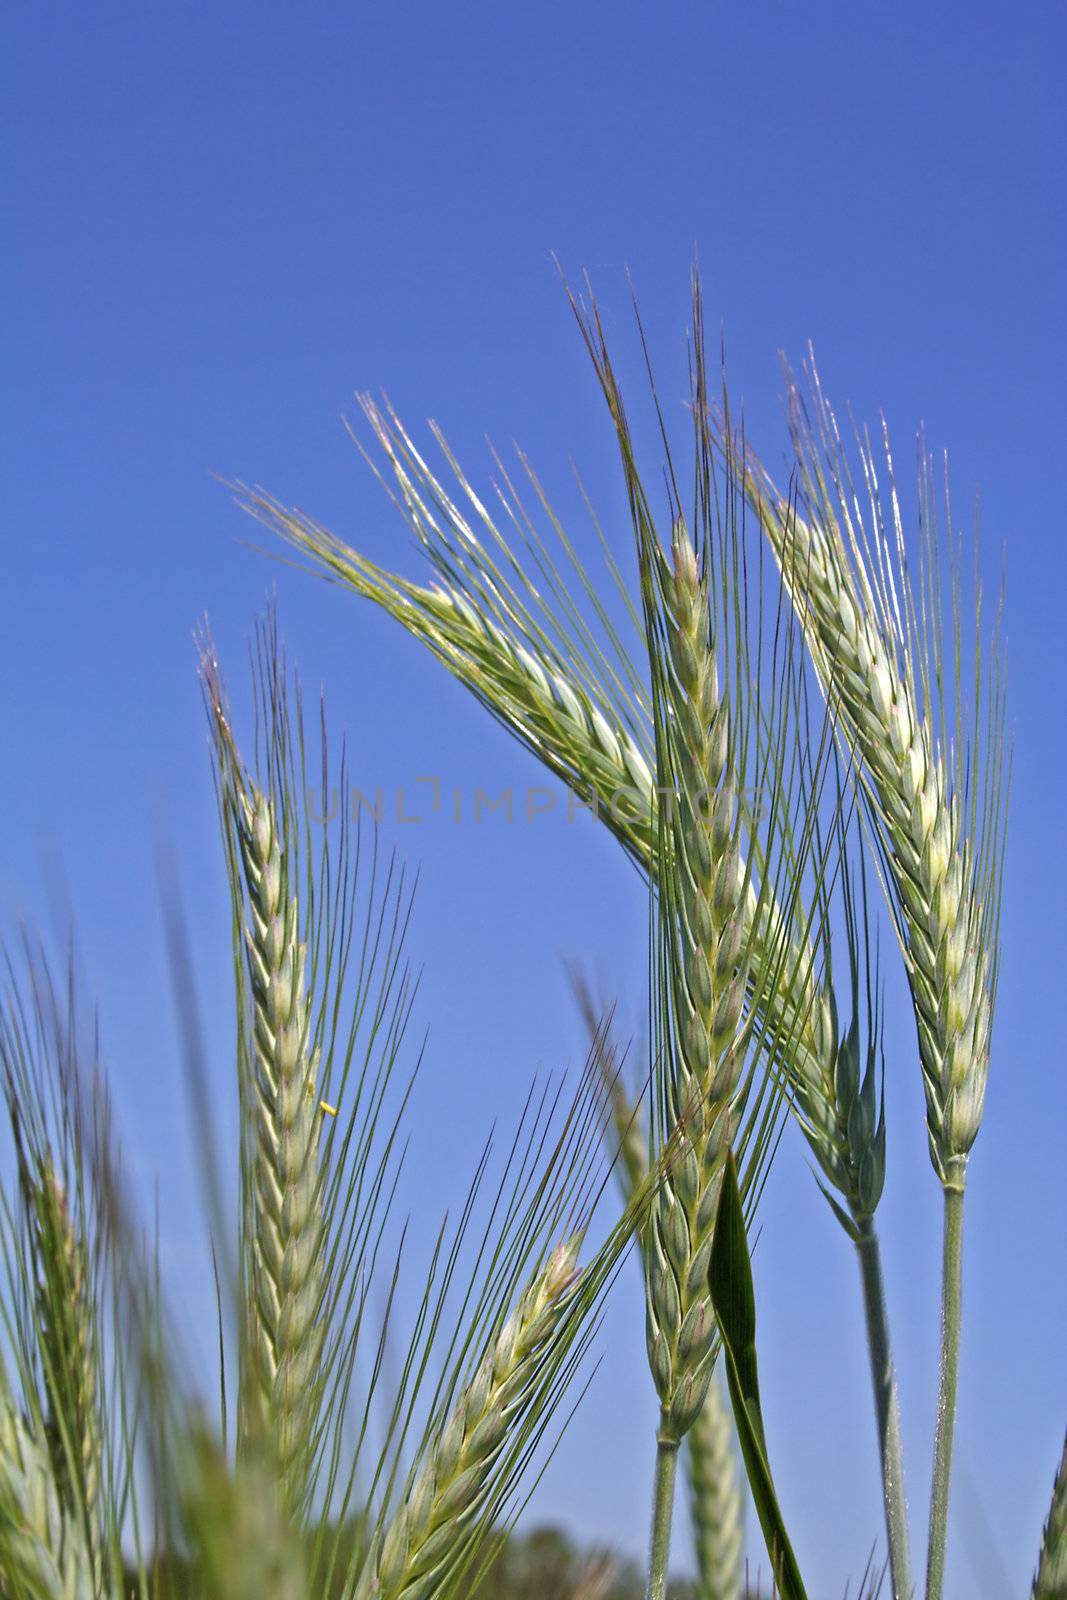 Several ears of barley in front of bright blue sky.